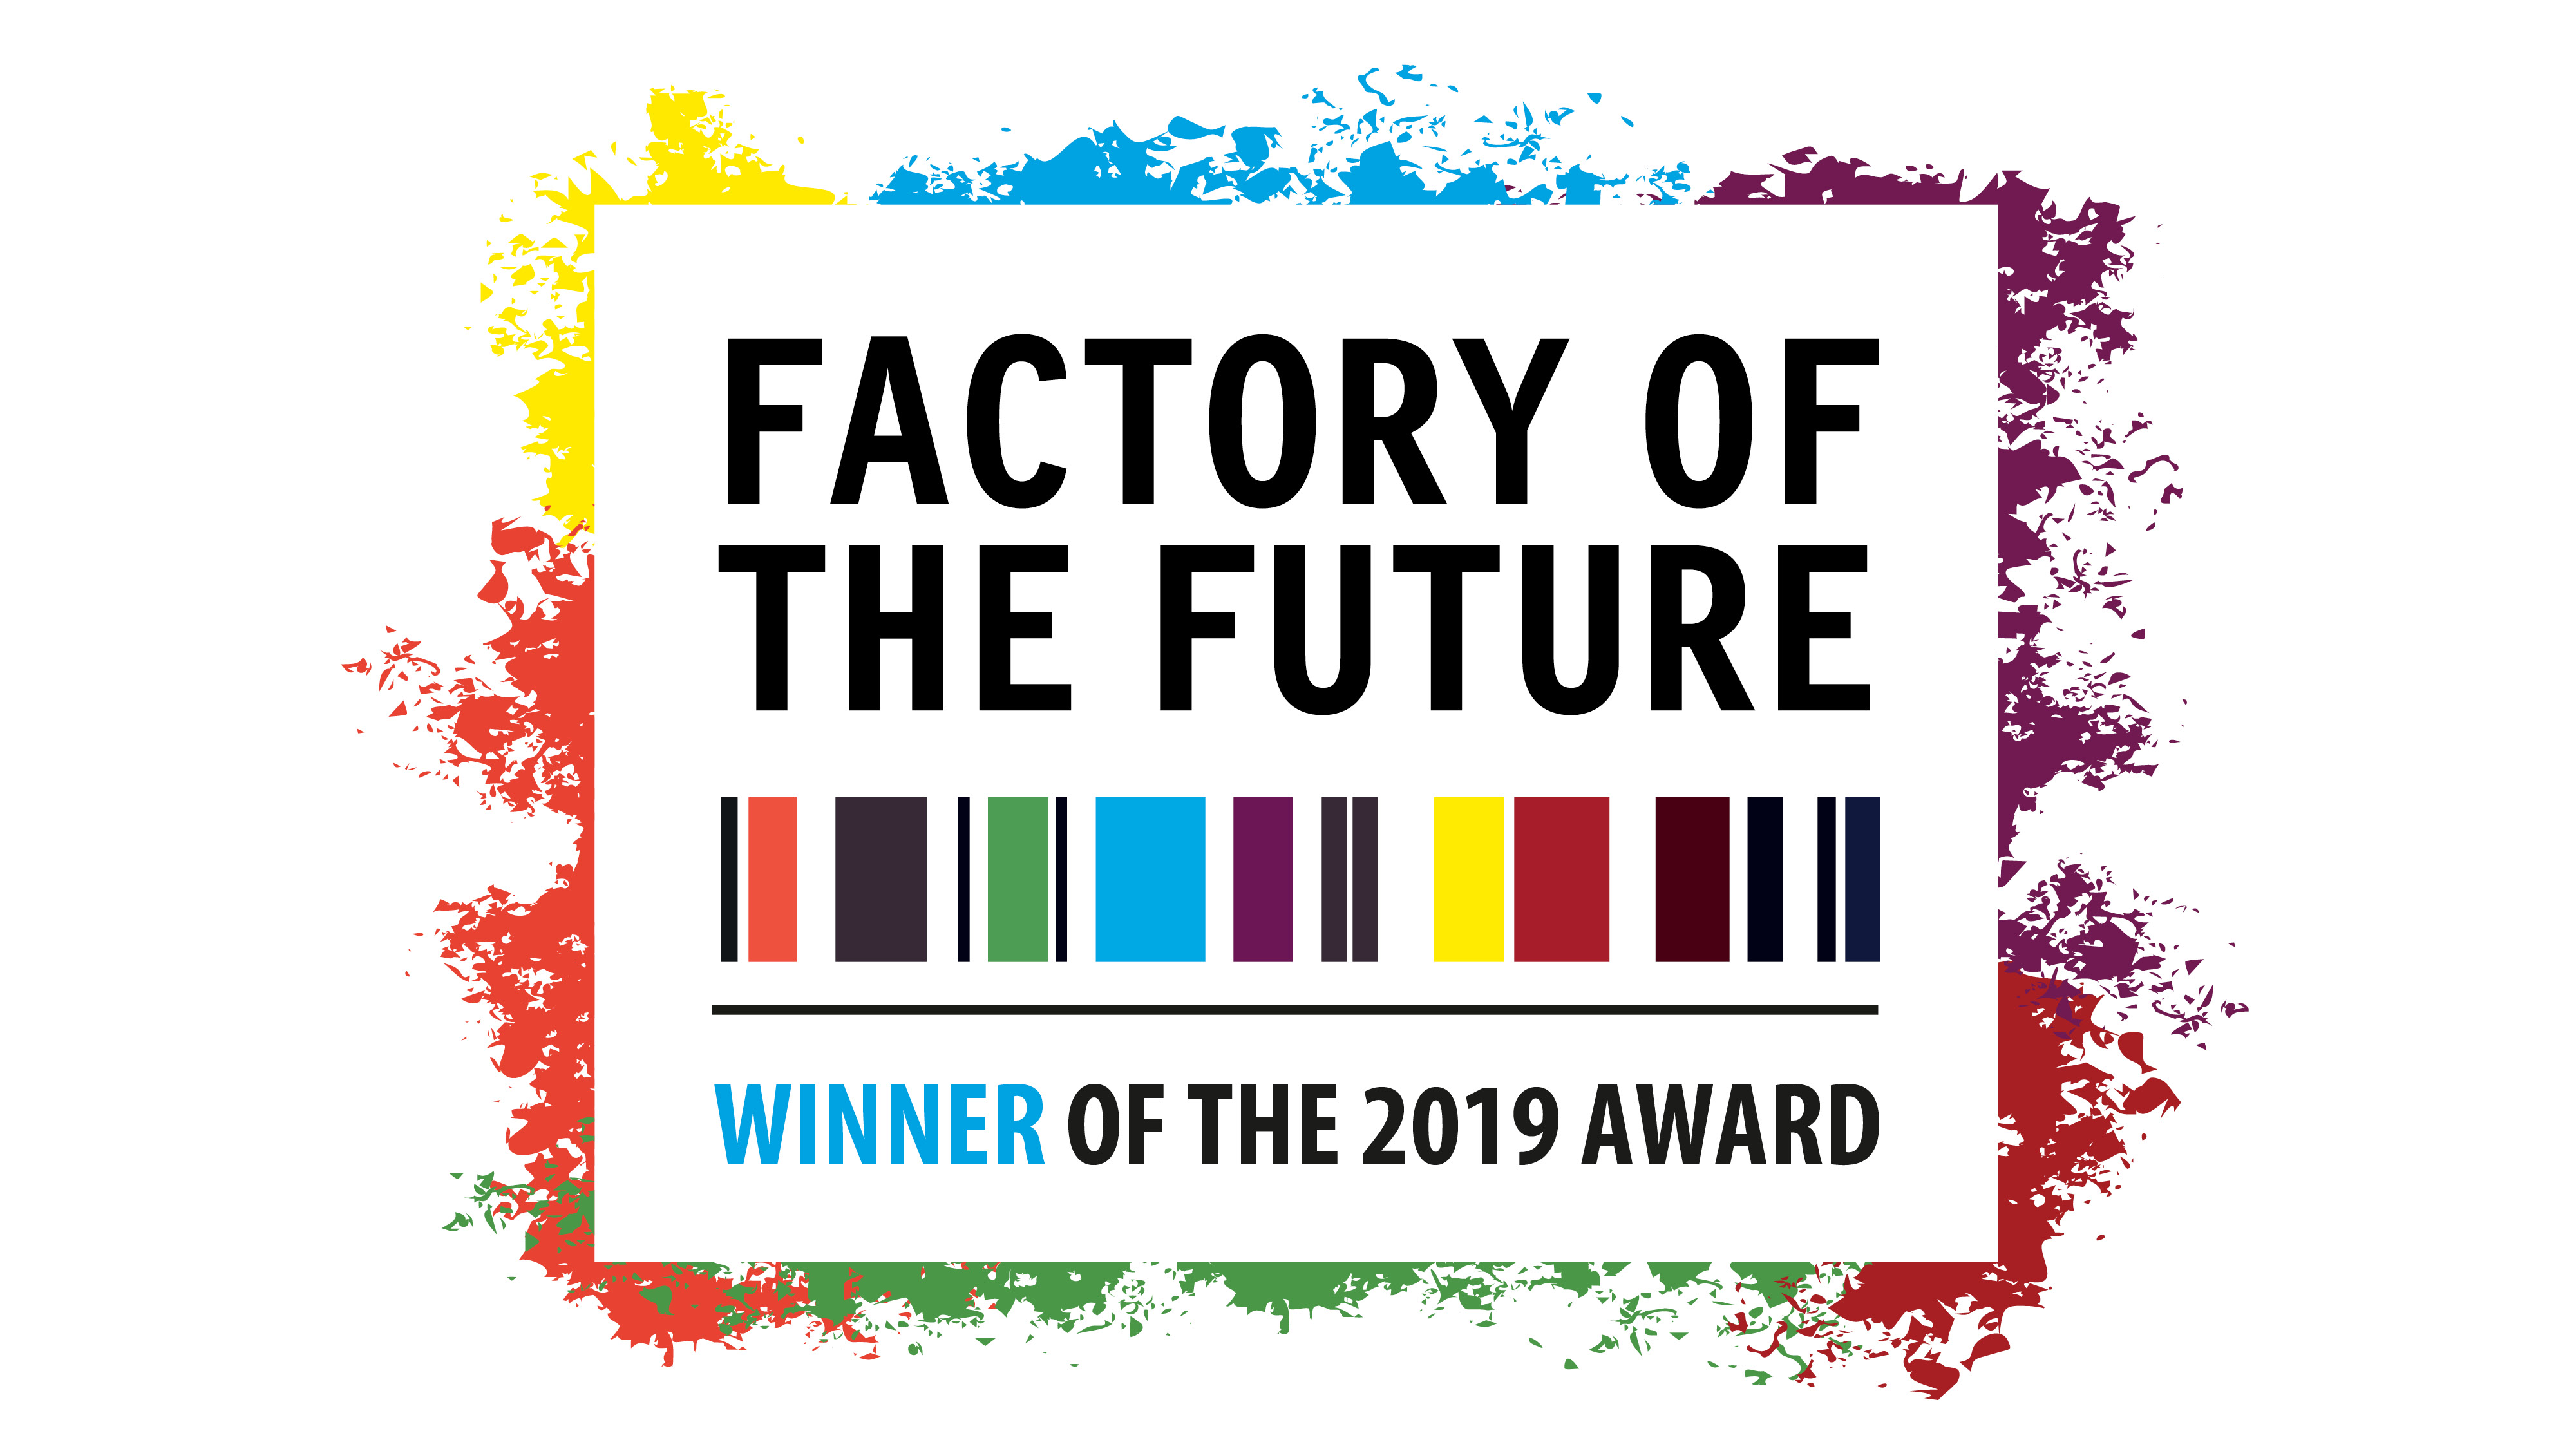 Factory of the future awards 2019 - review